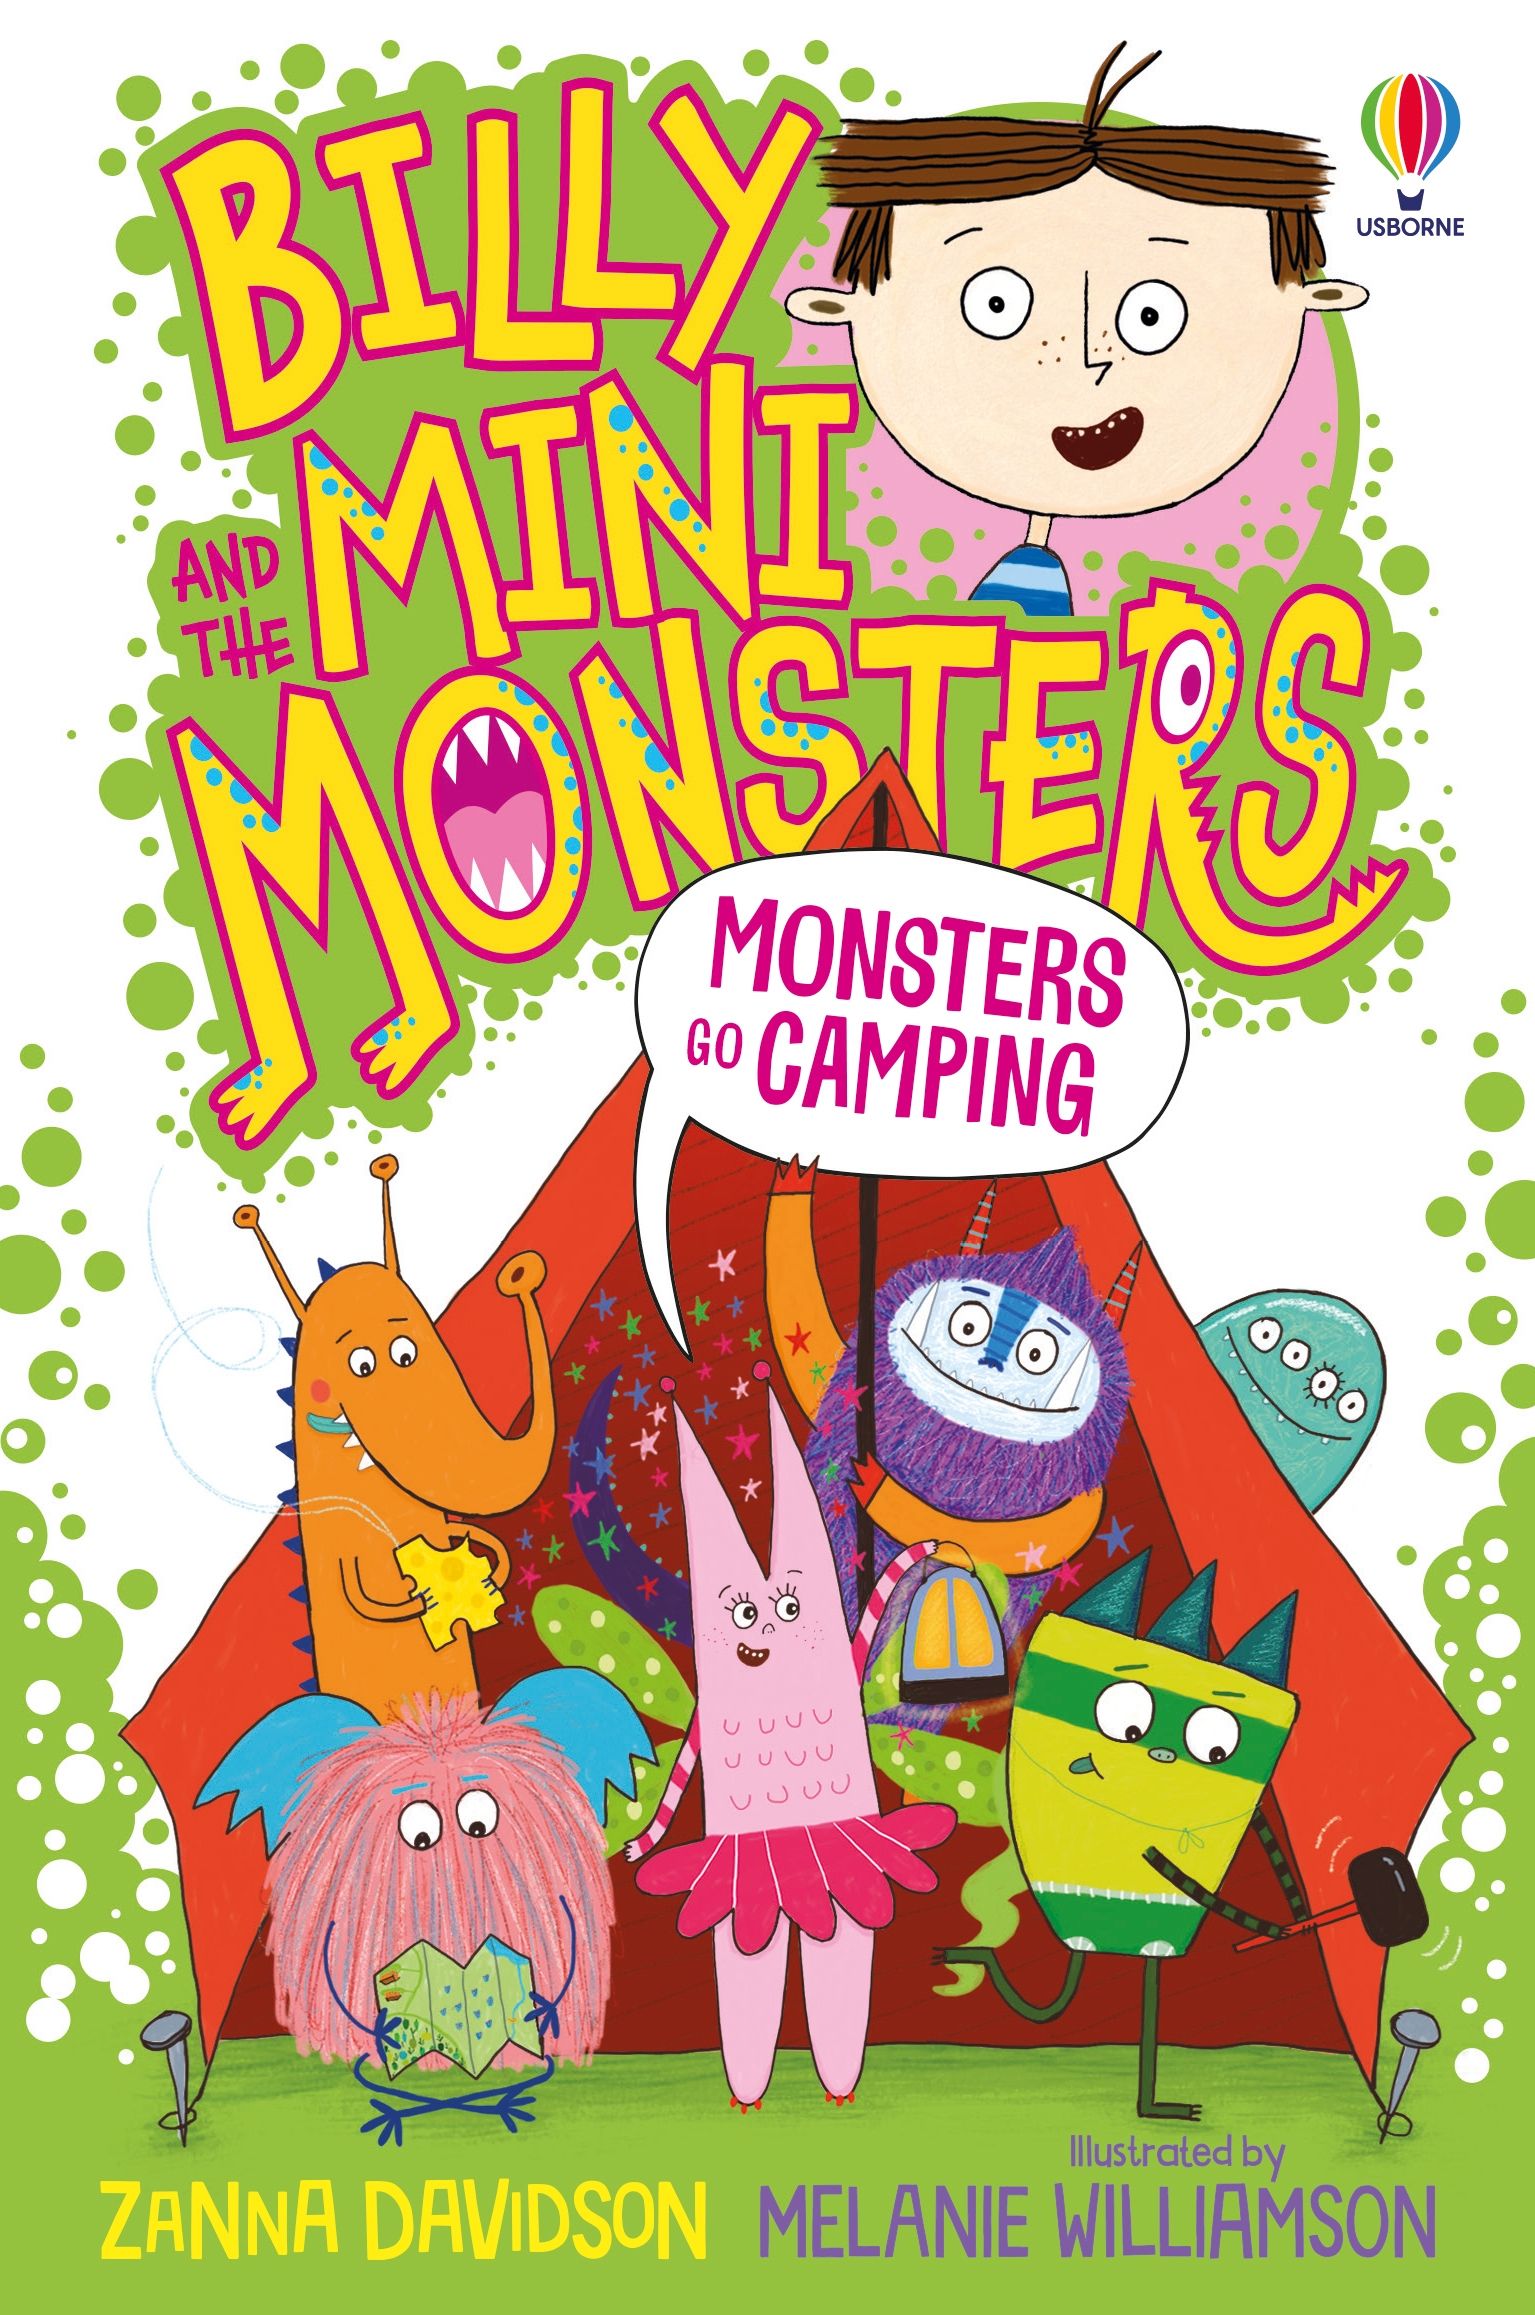 Monsters go Camping